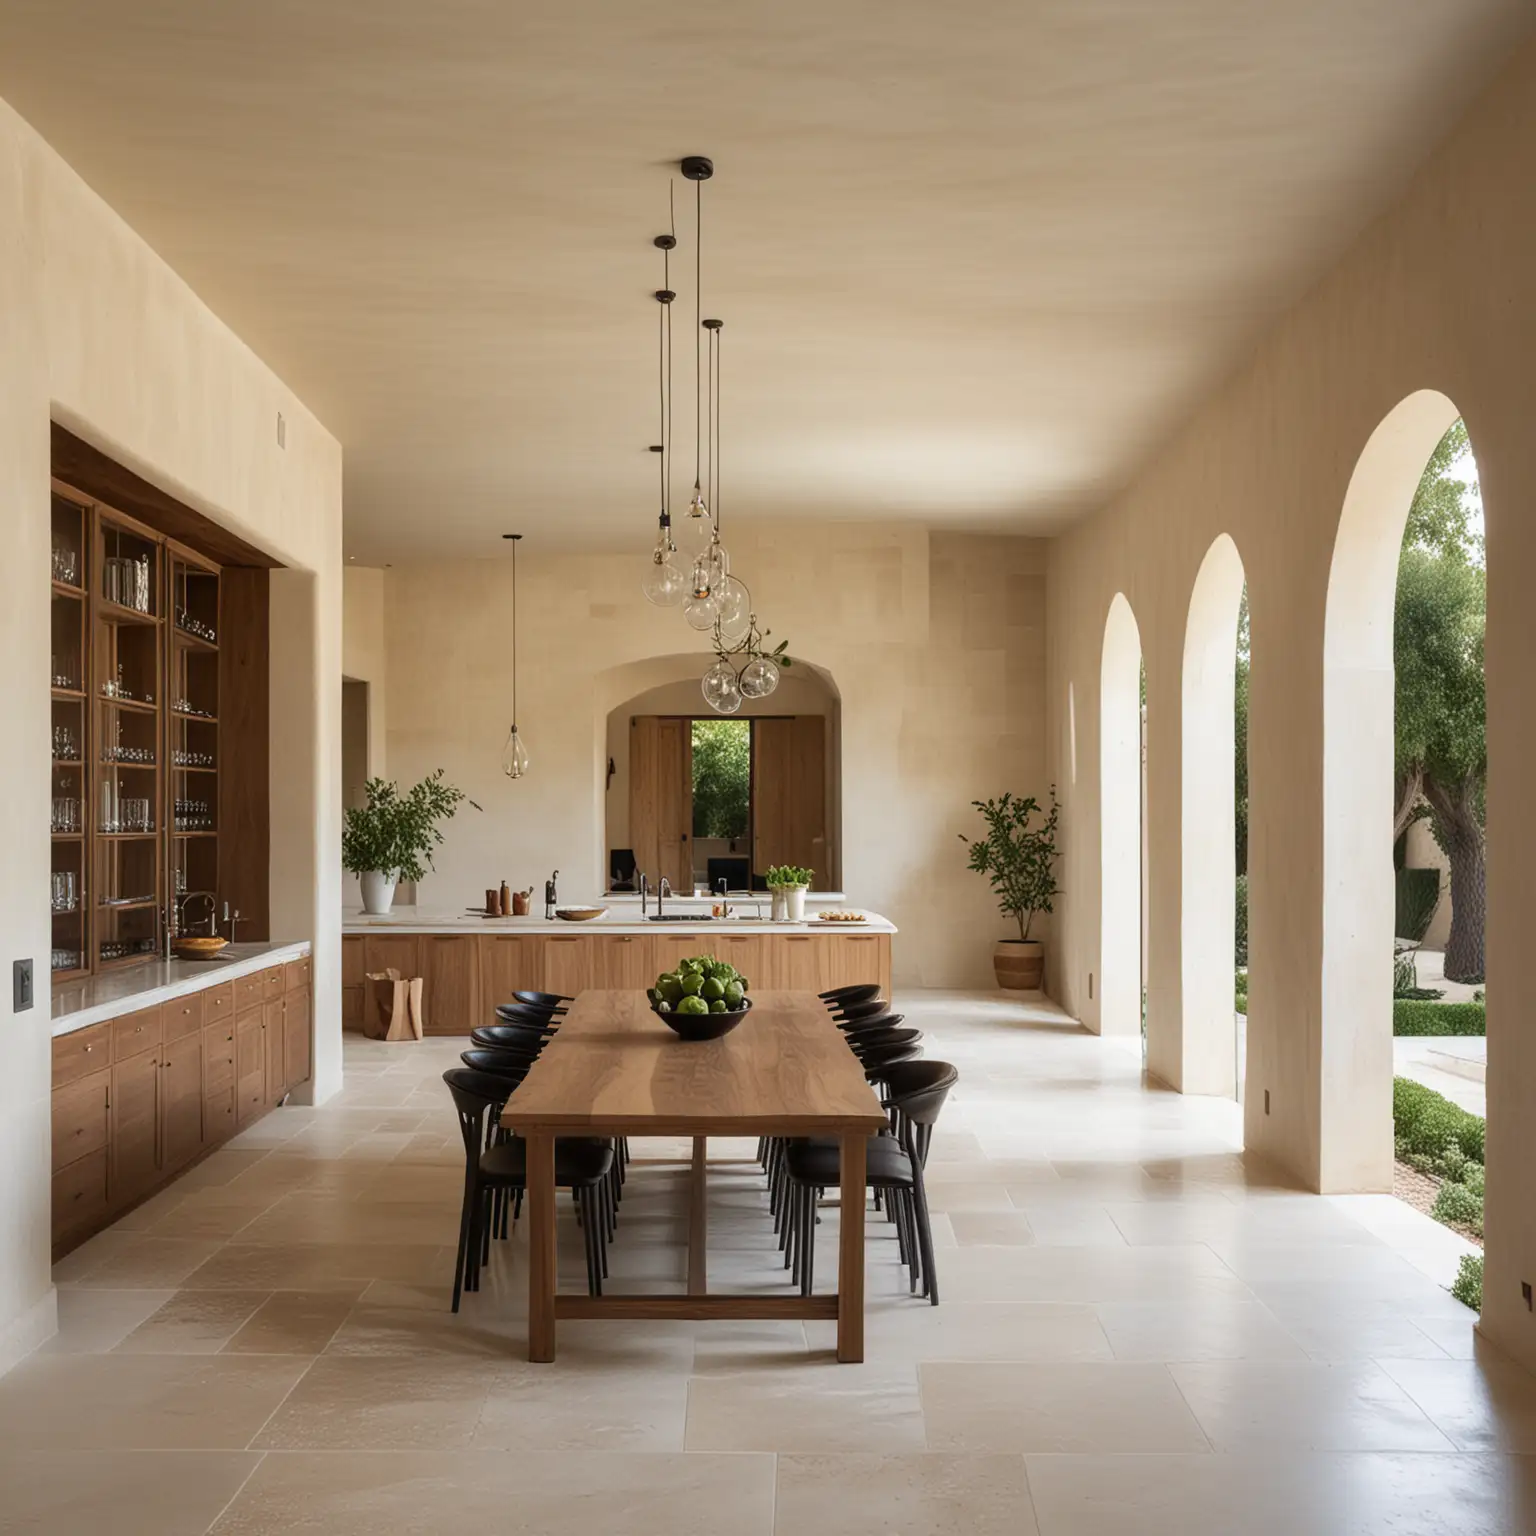 Mediterranean Inspired Estate Home with Minimalist Kitchen and Dining Area